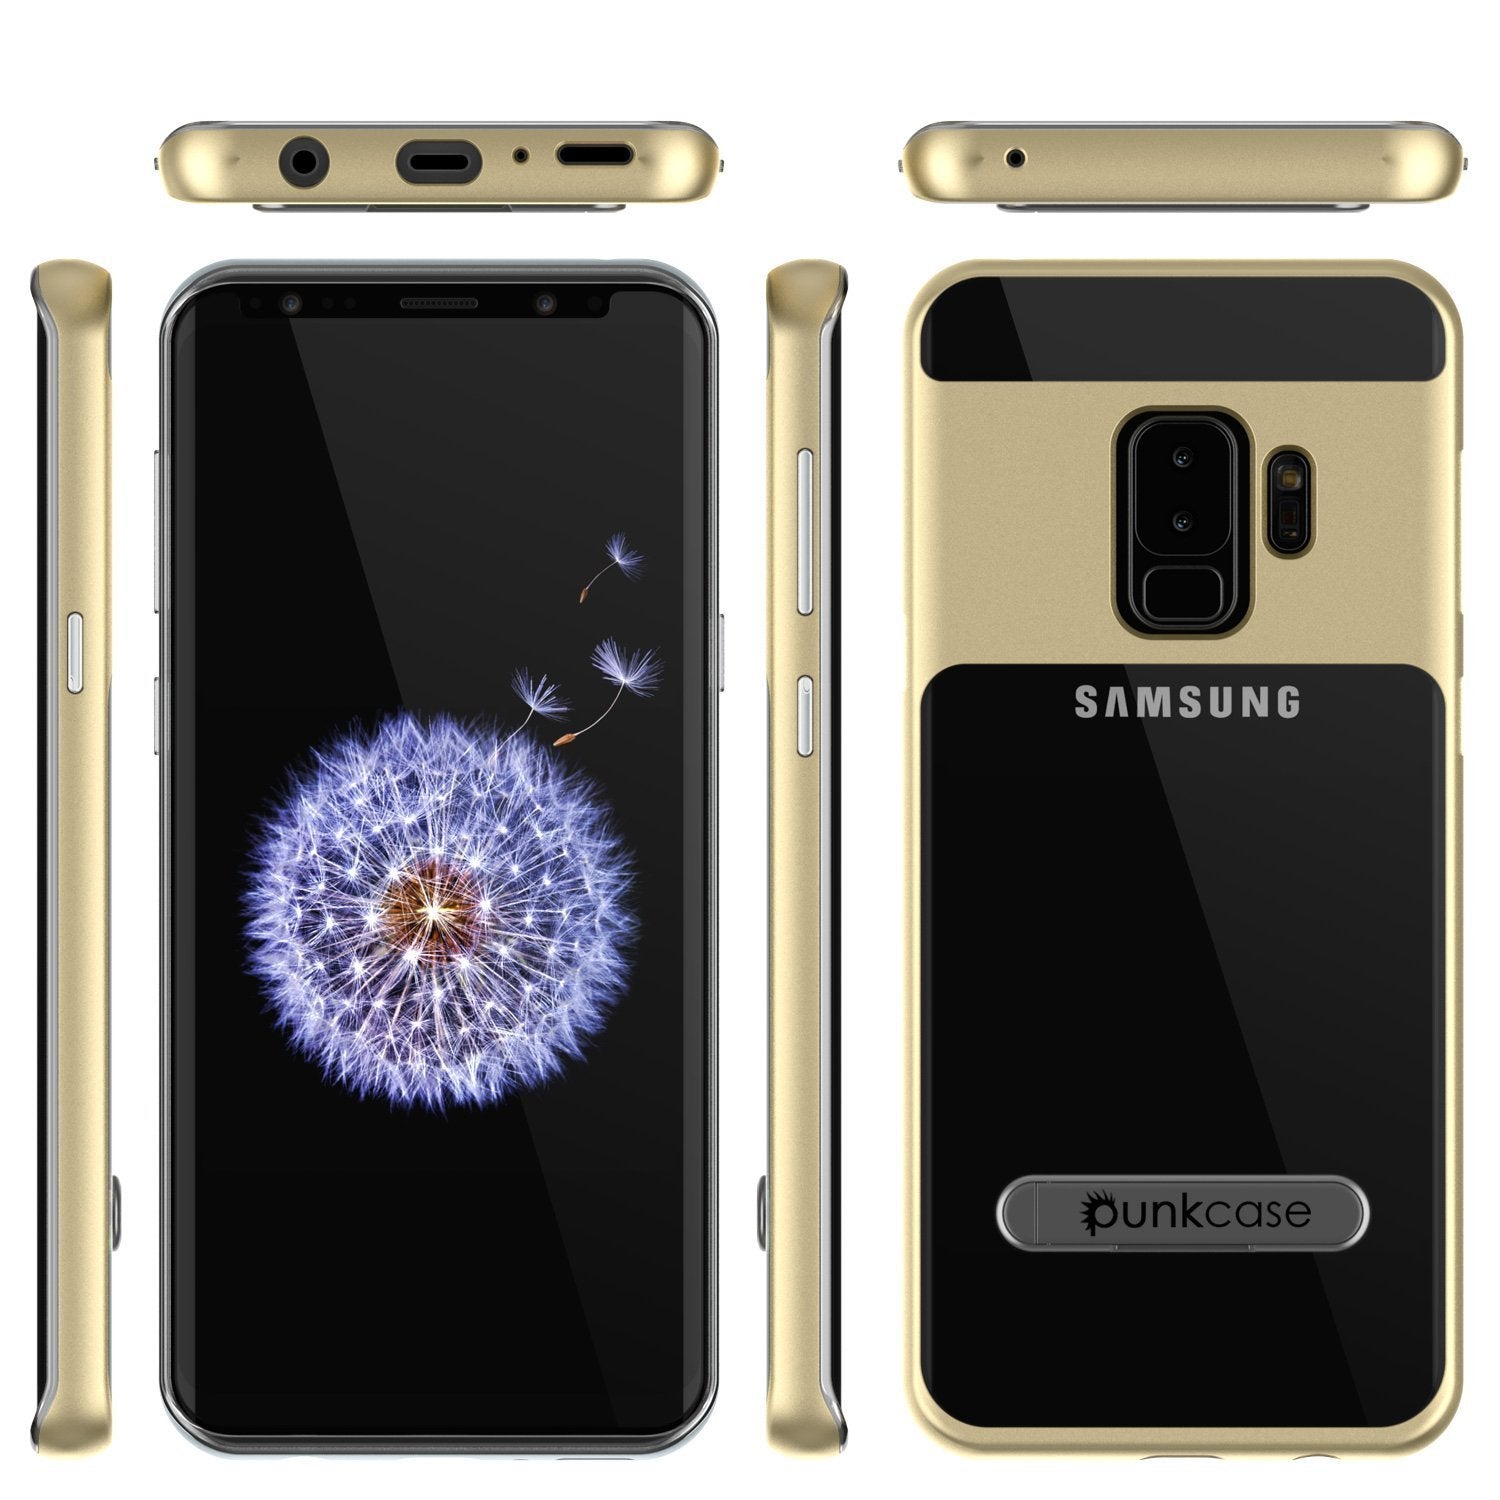 Galaxy S9+ Plus Case, PUNKcase [LUCID 3.0 Series] [Slim Fit] [Clear Back] Armor Cover w/ Integrated Kickstand, Anti-Shock System & PUNKSHIELD Screen Protector for Samsung Galaxy S9+ Plus [Gold] - PunkCase NZ